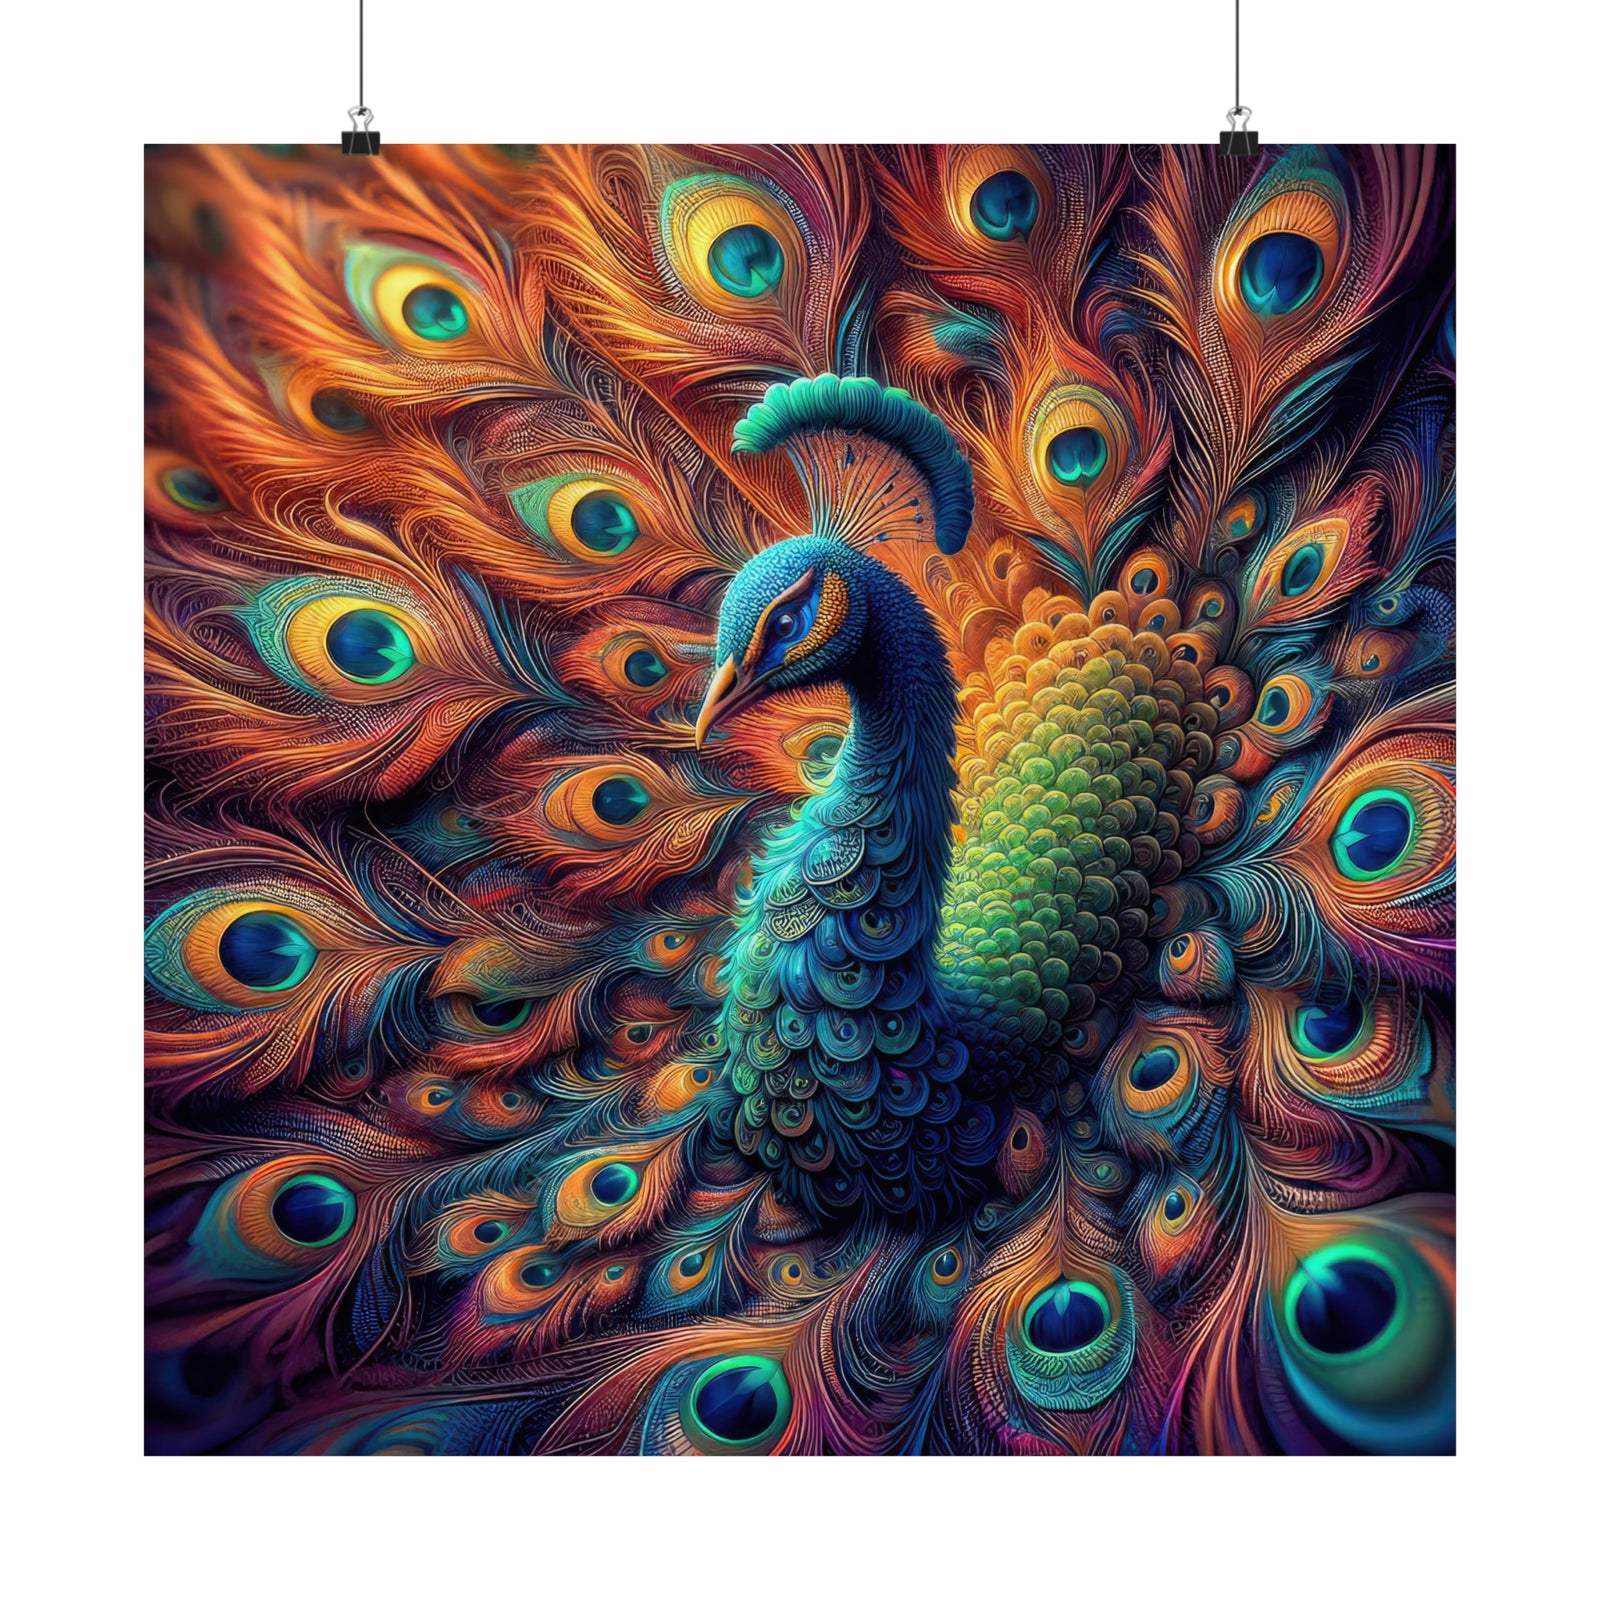 The Spiraling Splendor of the Majestic Peacock Poster